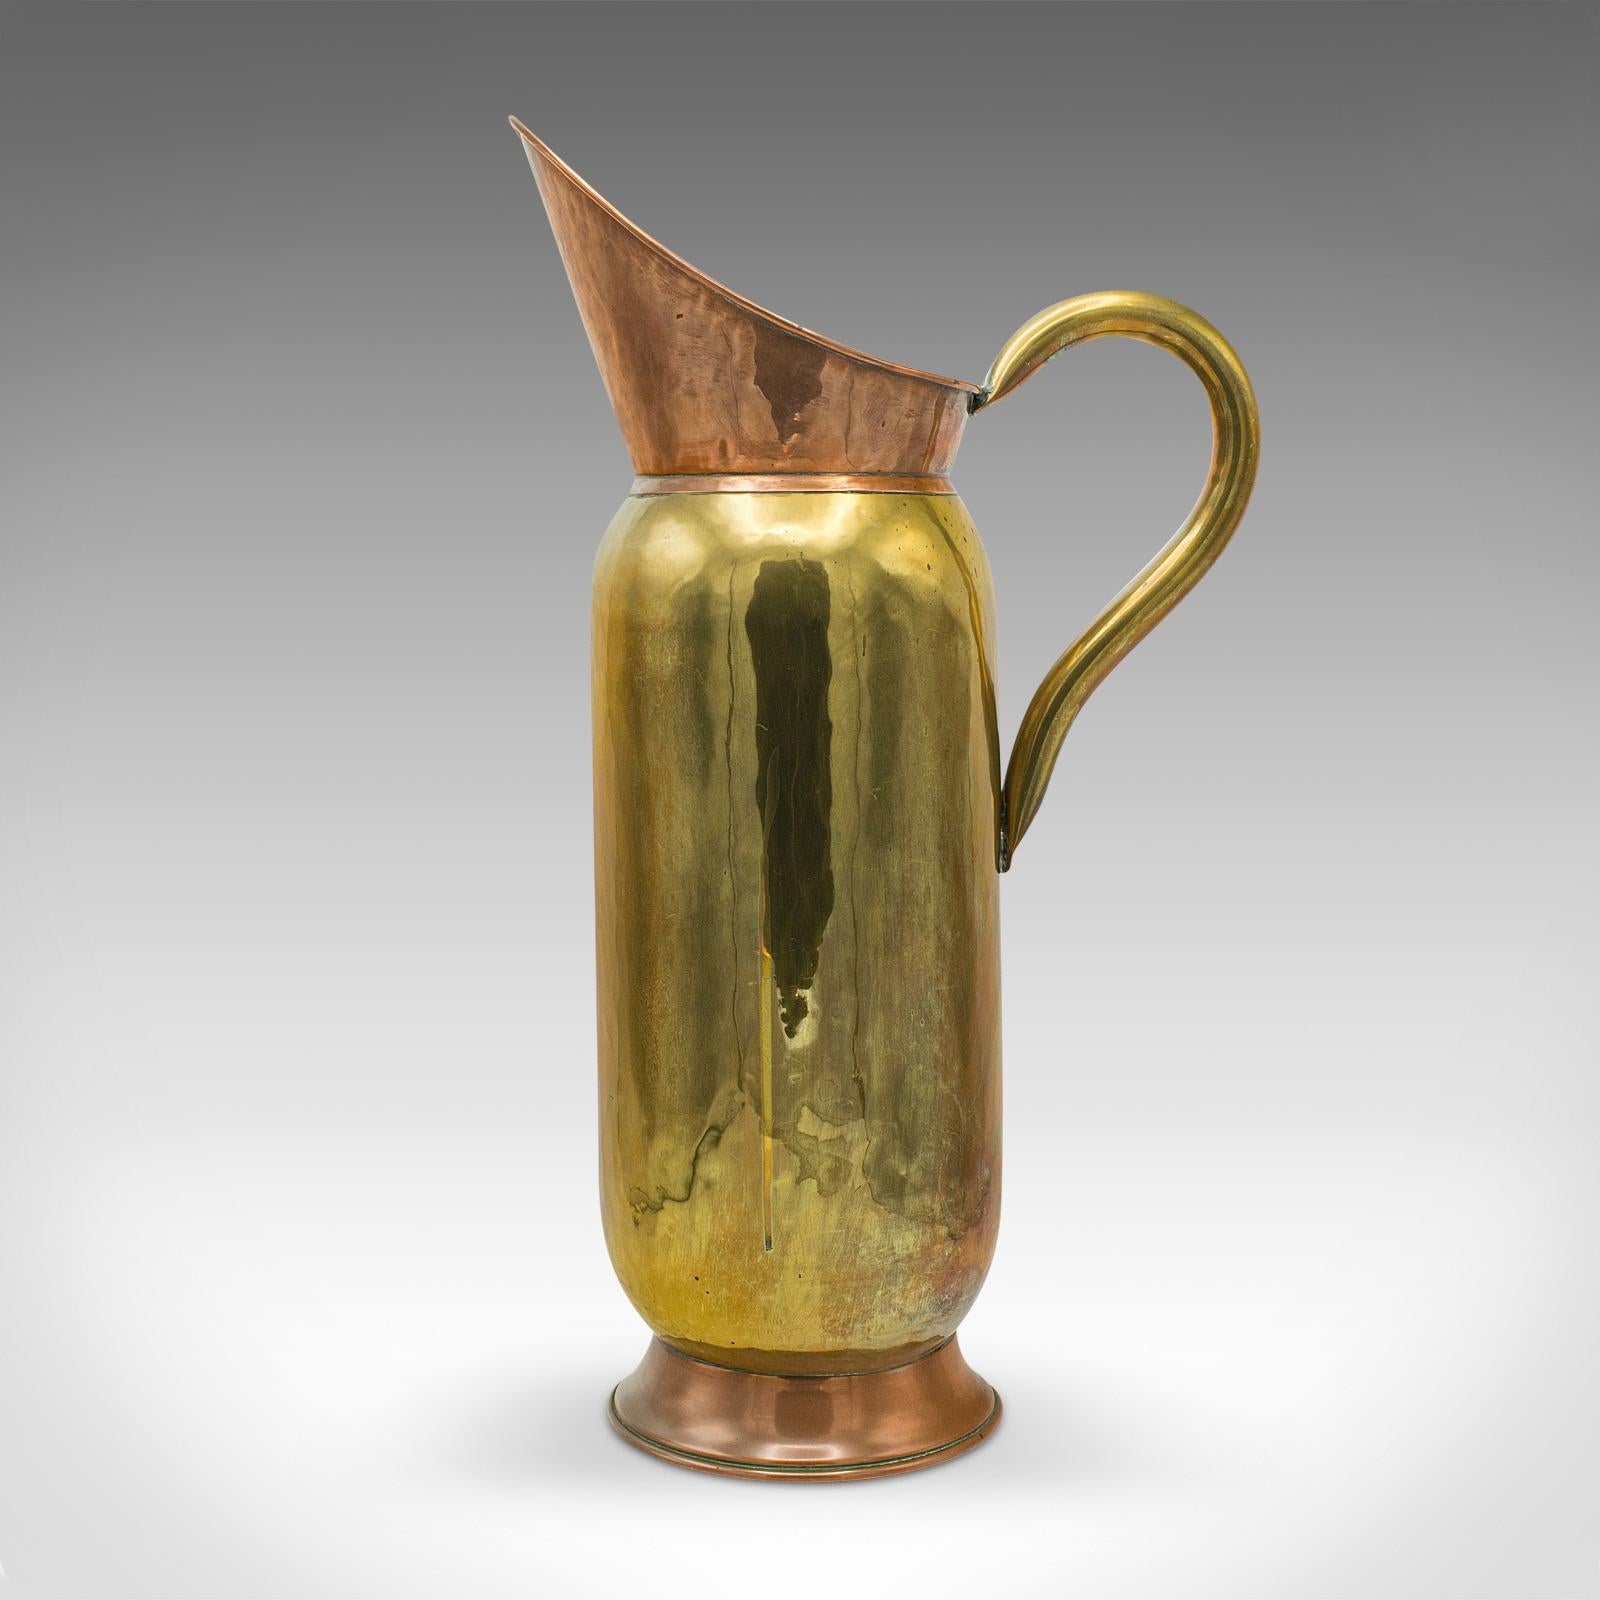 19th Century Tall Antique Pouring Jug, English, Brass, Copper, Ewer, Stem Vase, Victorian For Sale